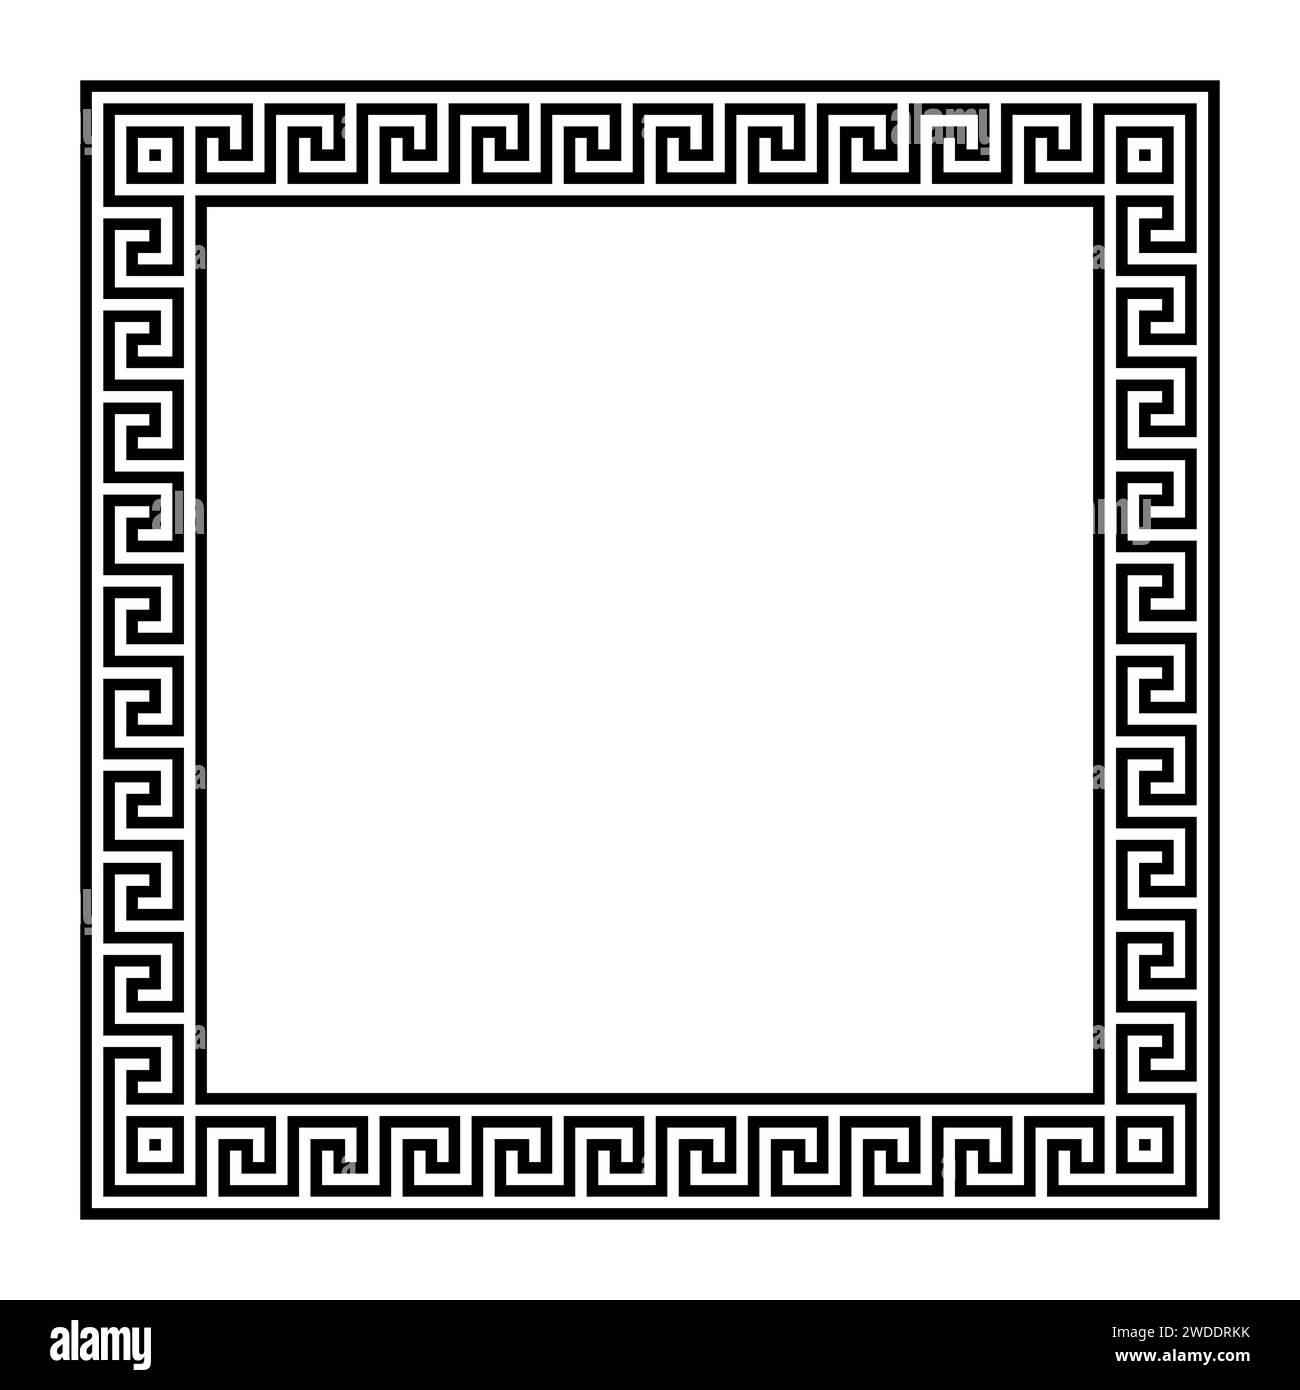 Meander square shaped frame with seamless Greek key pattern. Border with Greek fret motif, constructed from continuous lines. Stock Photo